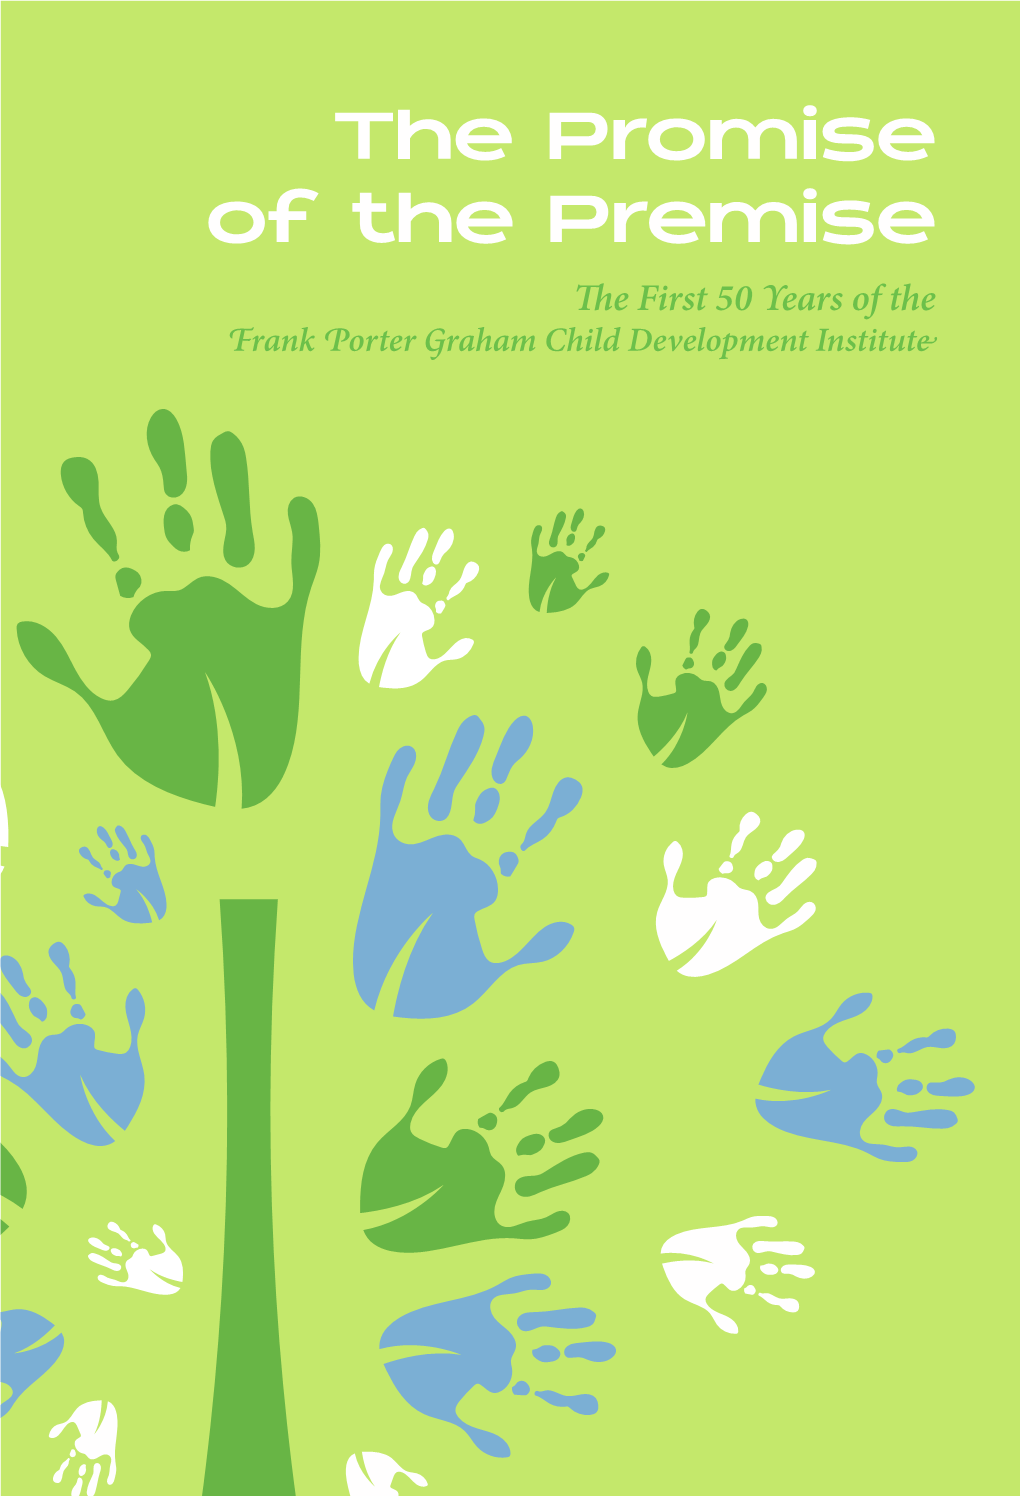 The Promise of the Premise: the First 50 Years of the Frank Porter Graham Child Development Institute